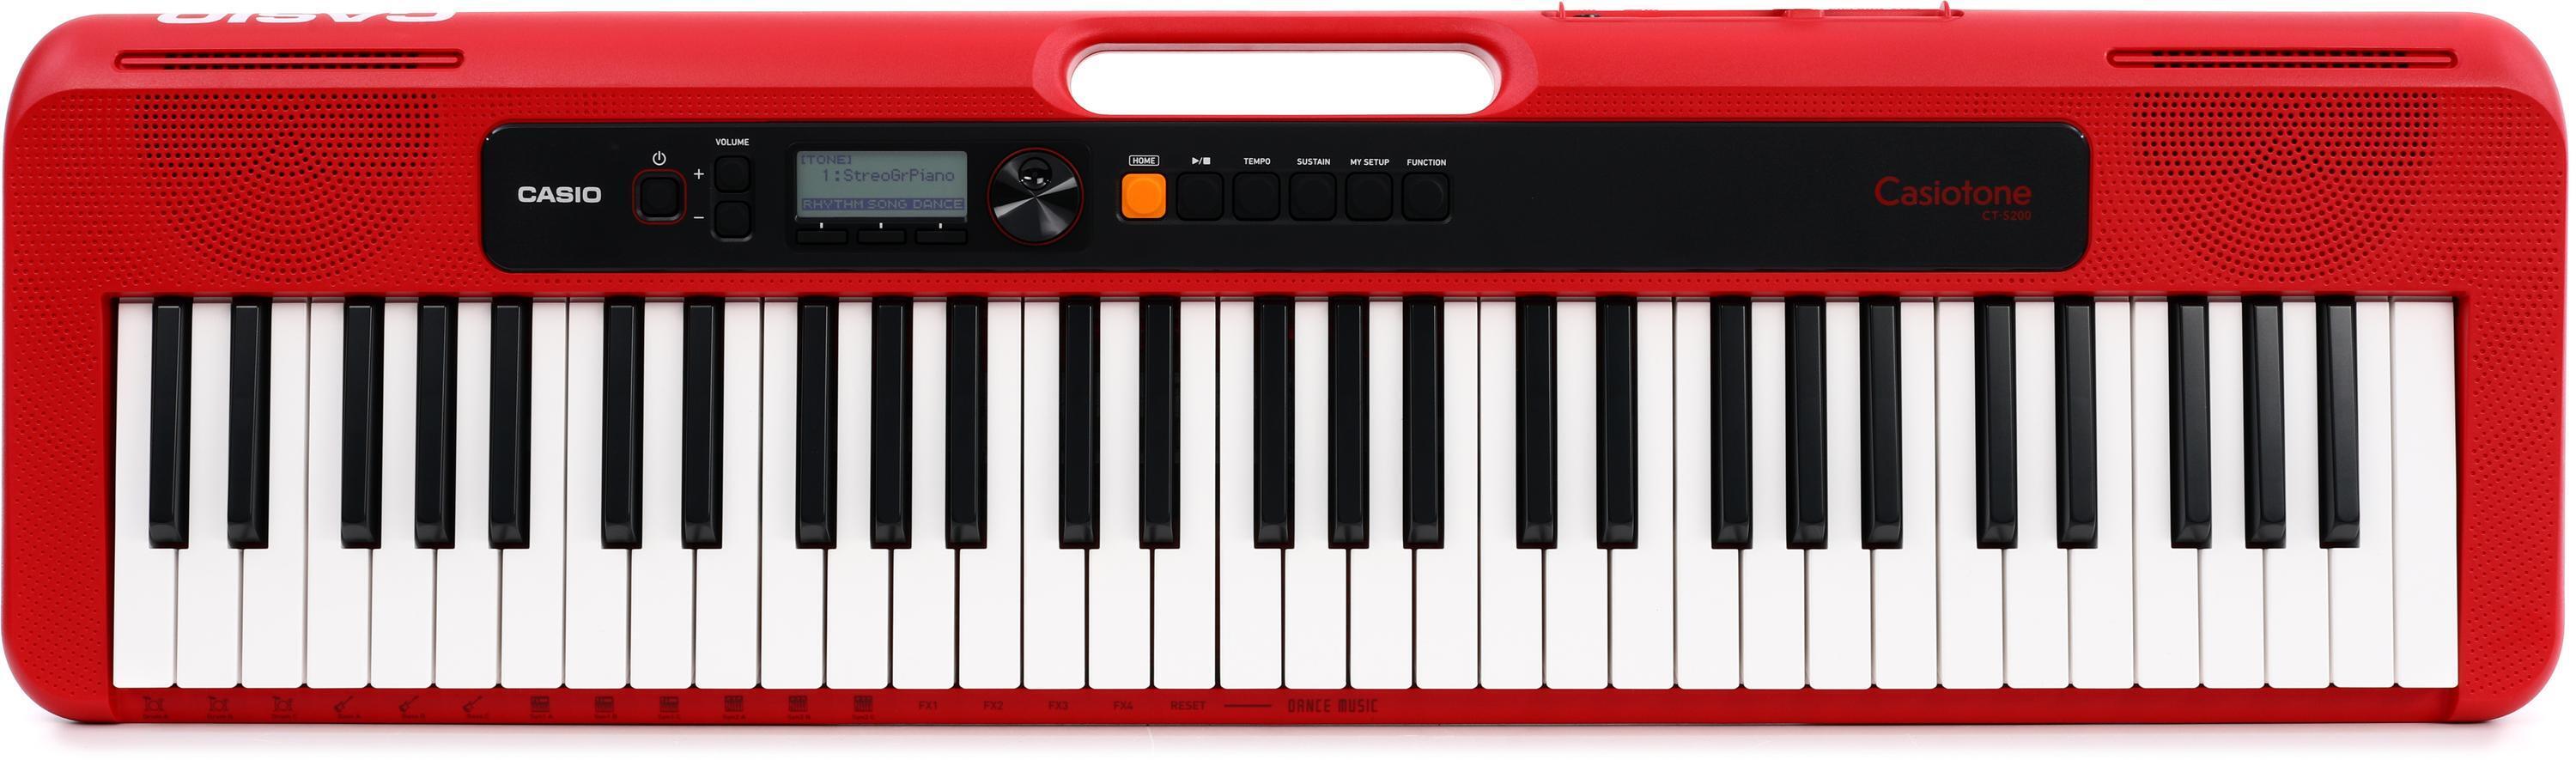 Casio Casiotone CT S  key Portable Arranger Keyboard   Red